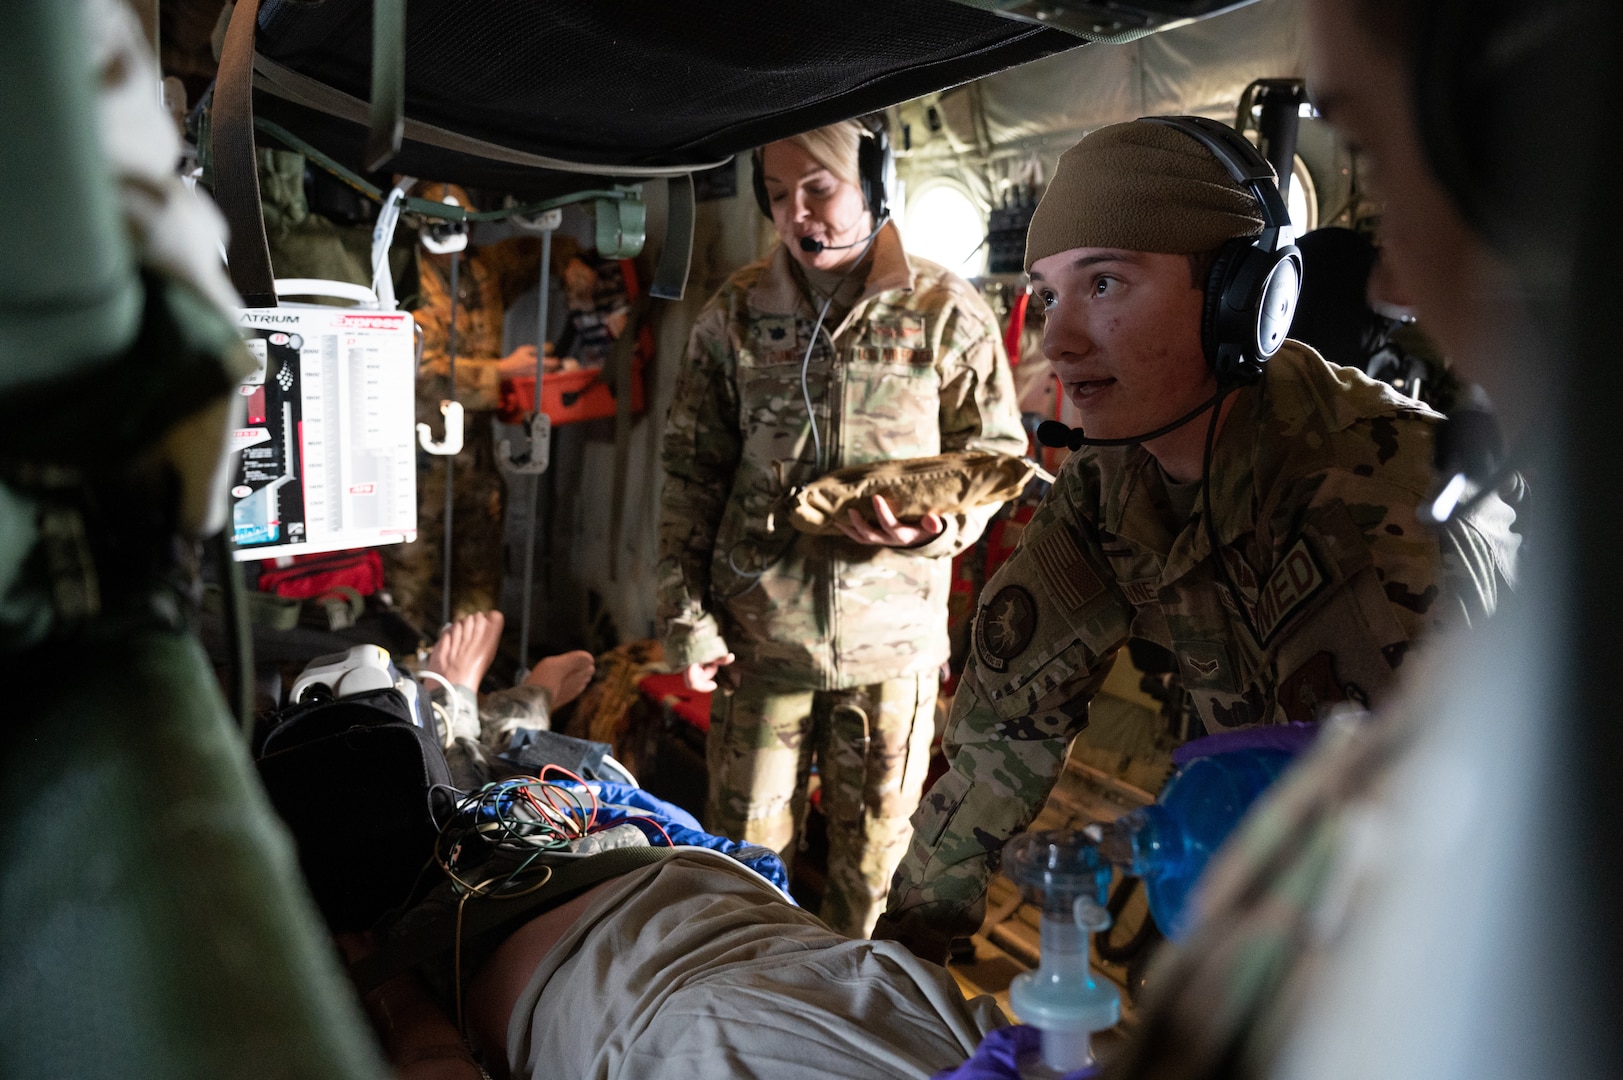 From left, U.S. Air Force Lt. Col. Trina Young, a flight nurse assigned to the 167th Aeromedical Evacuation Squadron based at McLaughlin Air National Guard Base, Charleston, West Virginia, holds medical equipment, while flight medics Airman 1st Class Caleb Wynne and Airman 1st Class Haleigh Romage attempt to resuscitate a simulated dying patient during a medical evacuation exercise aboard a C-130J, Dec. 20, 2022. The 167th AES conducted in-flight emergency medical simulation training to maintain currency and hone their medical skills for real-world missions. (U.S. Air National Guard photo by Airman 1st Class Kaden Salmons)